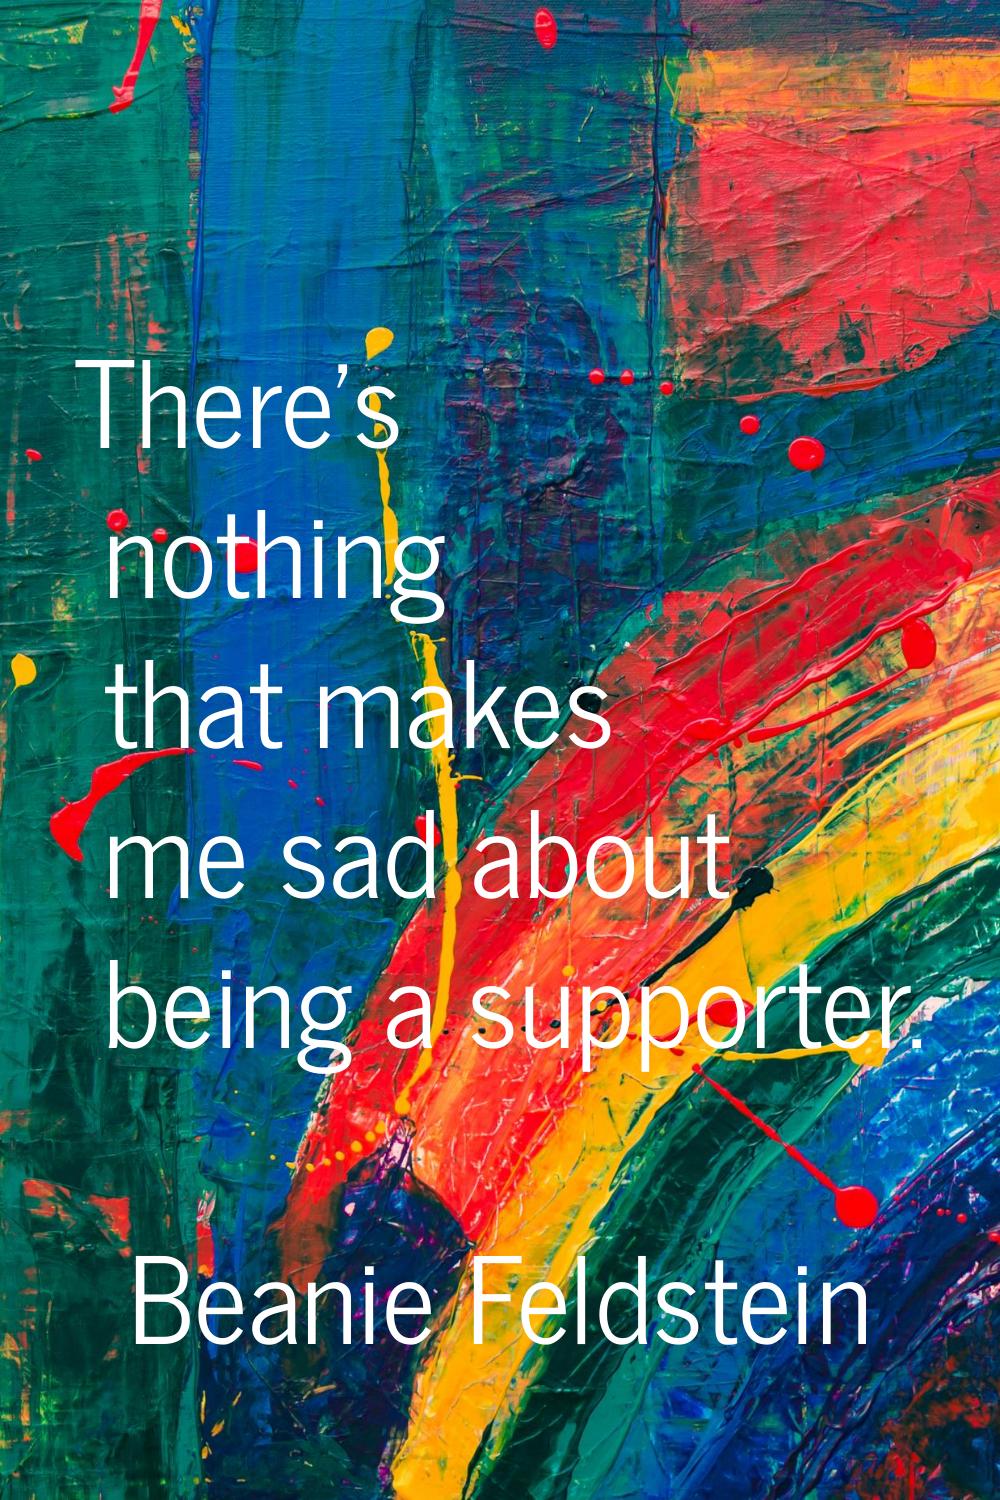 There's nothing that makes me sad about being a supporter.